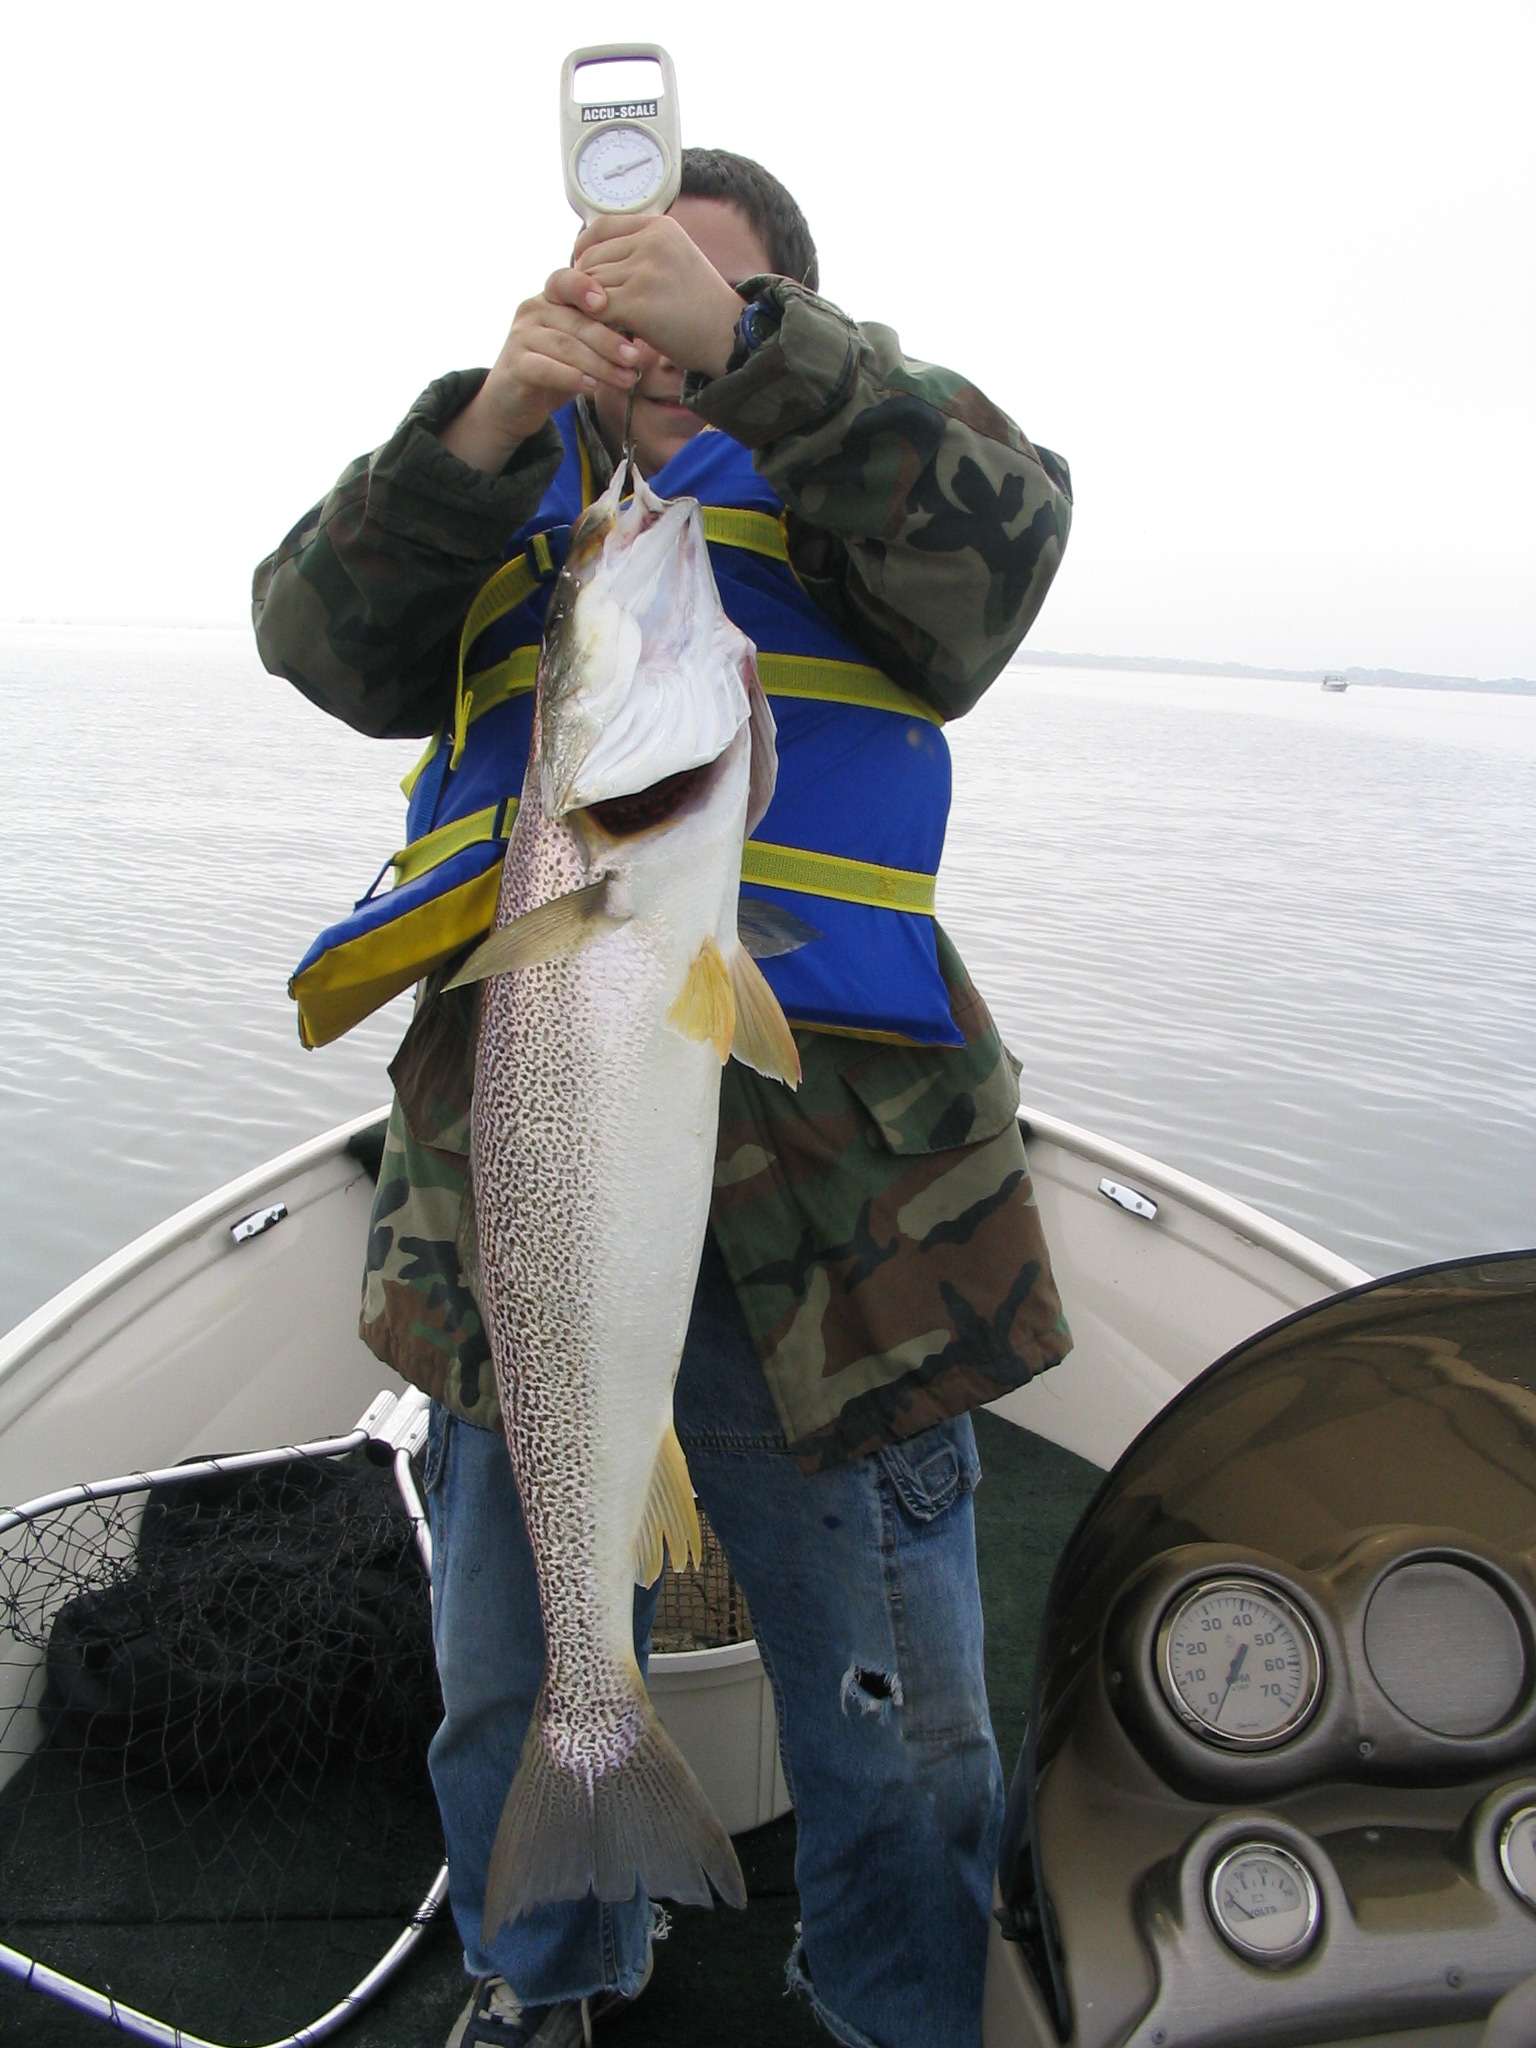 9.8 lb weakfish